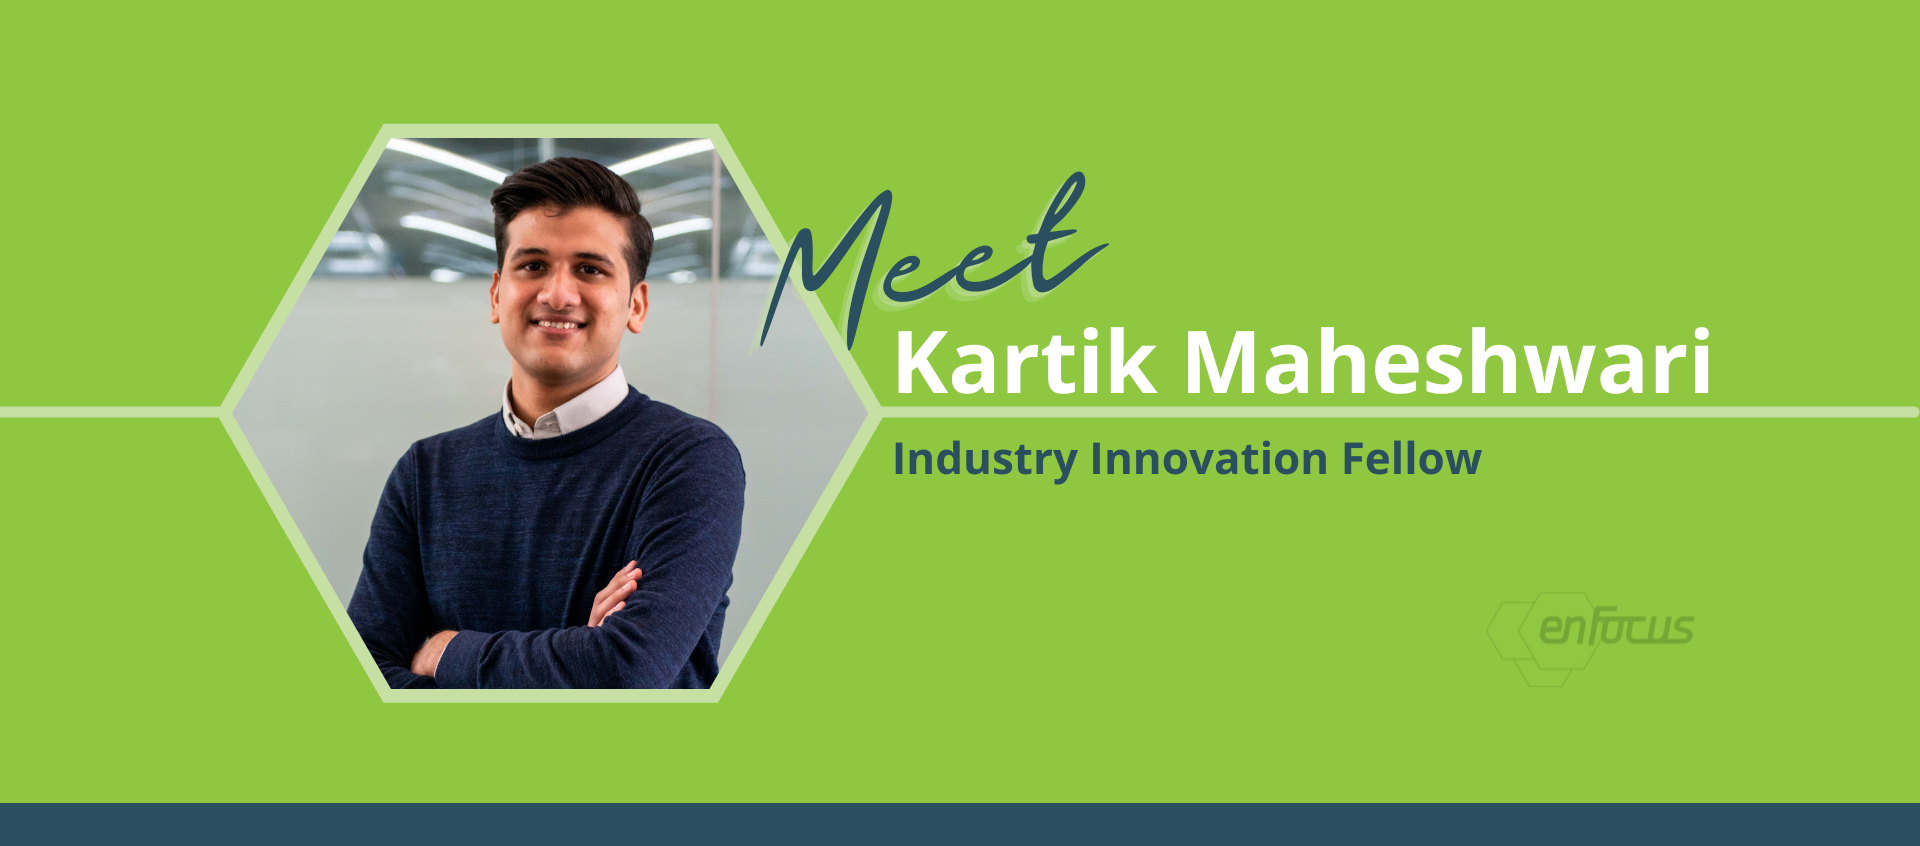 Kartik Leans into enFocus Values of Learning and Ownership